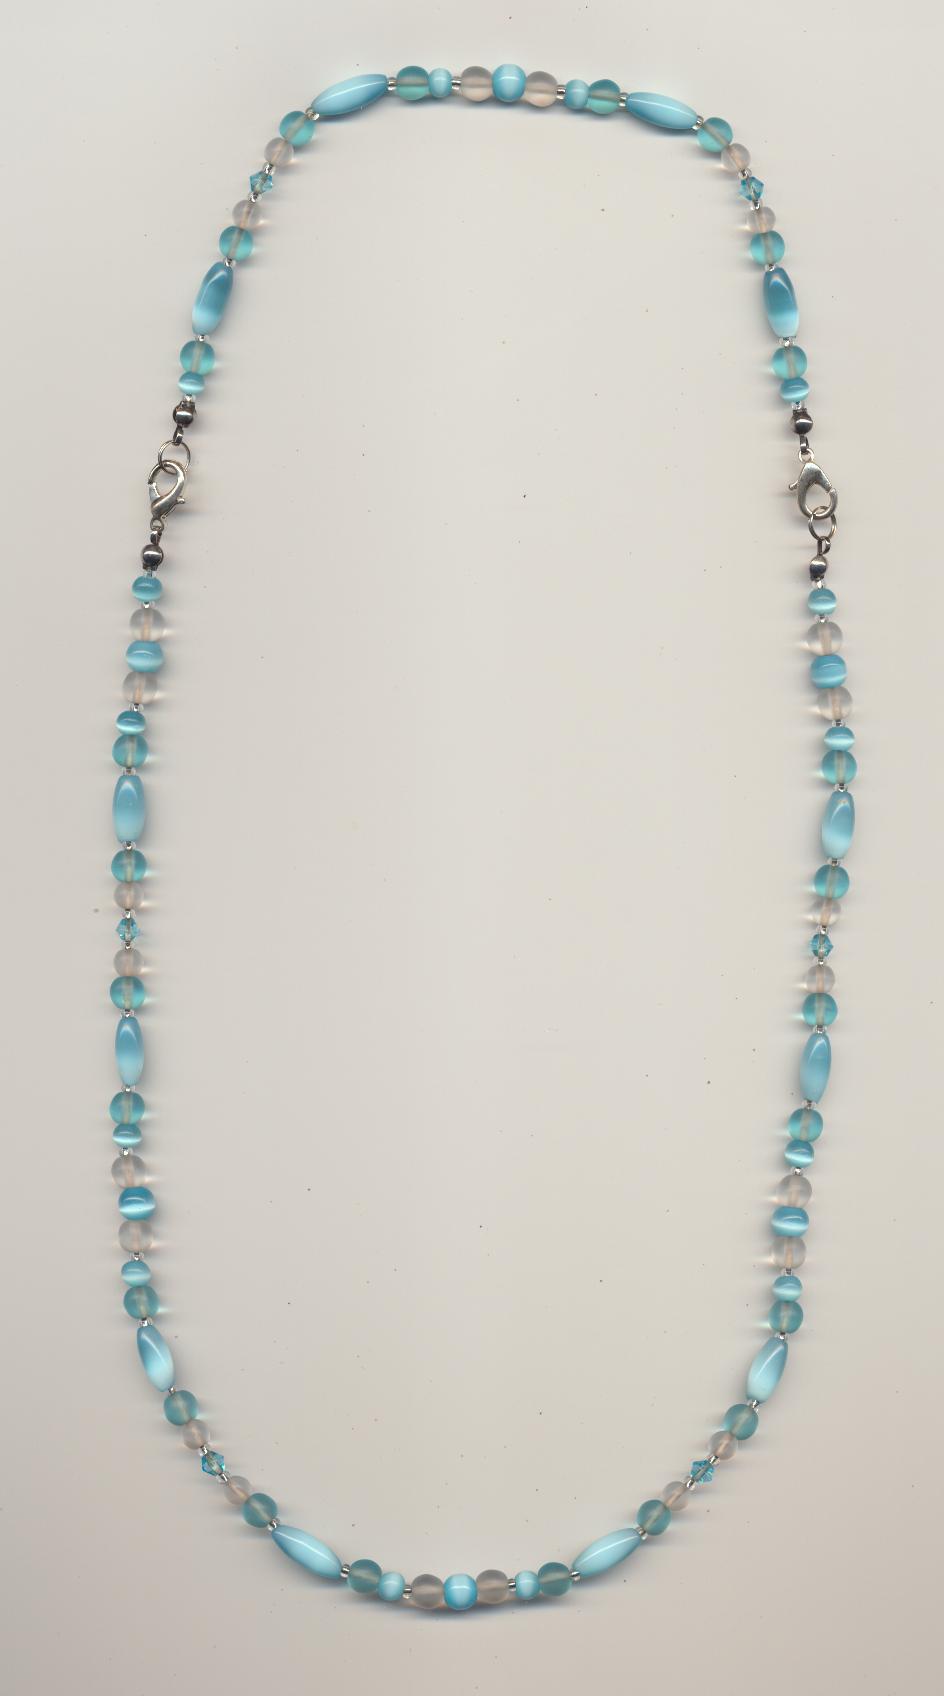 From short to long: a necklace made from a necklace and its bracelet 